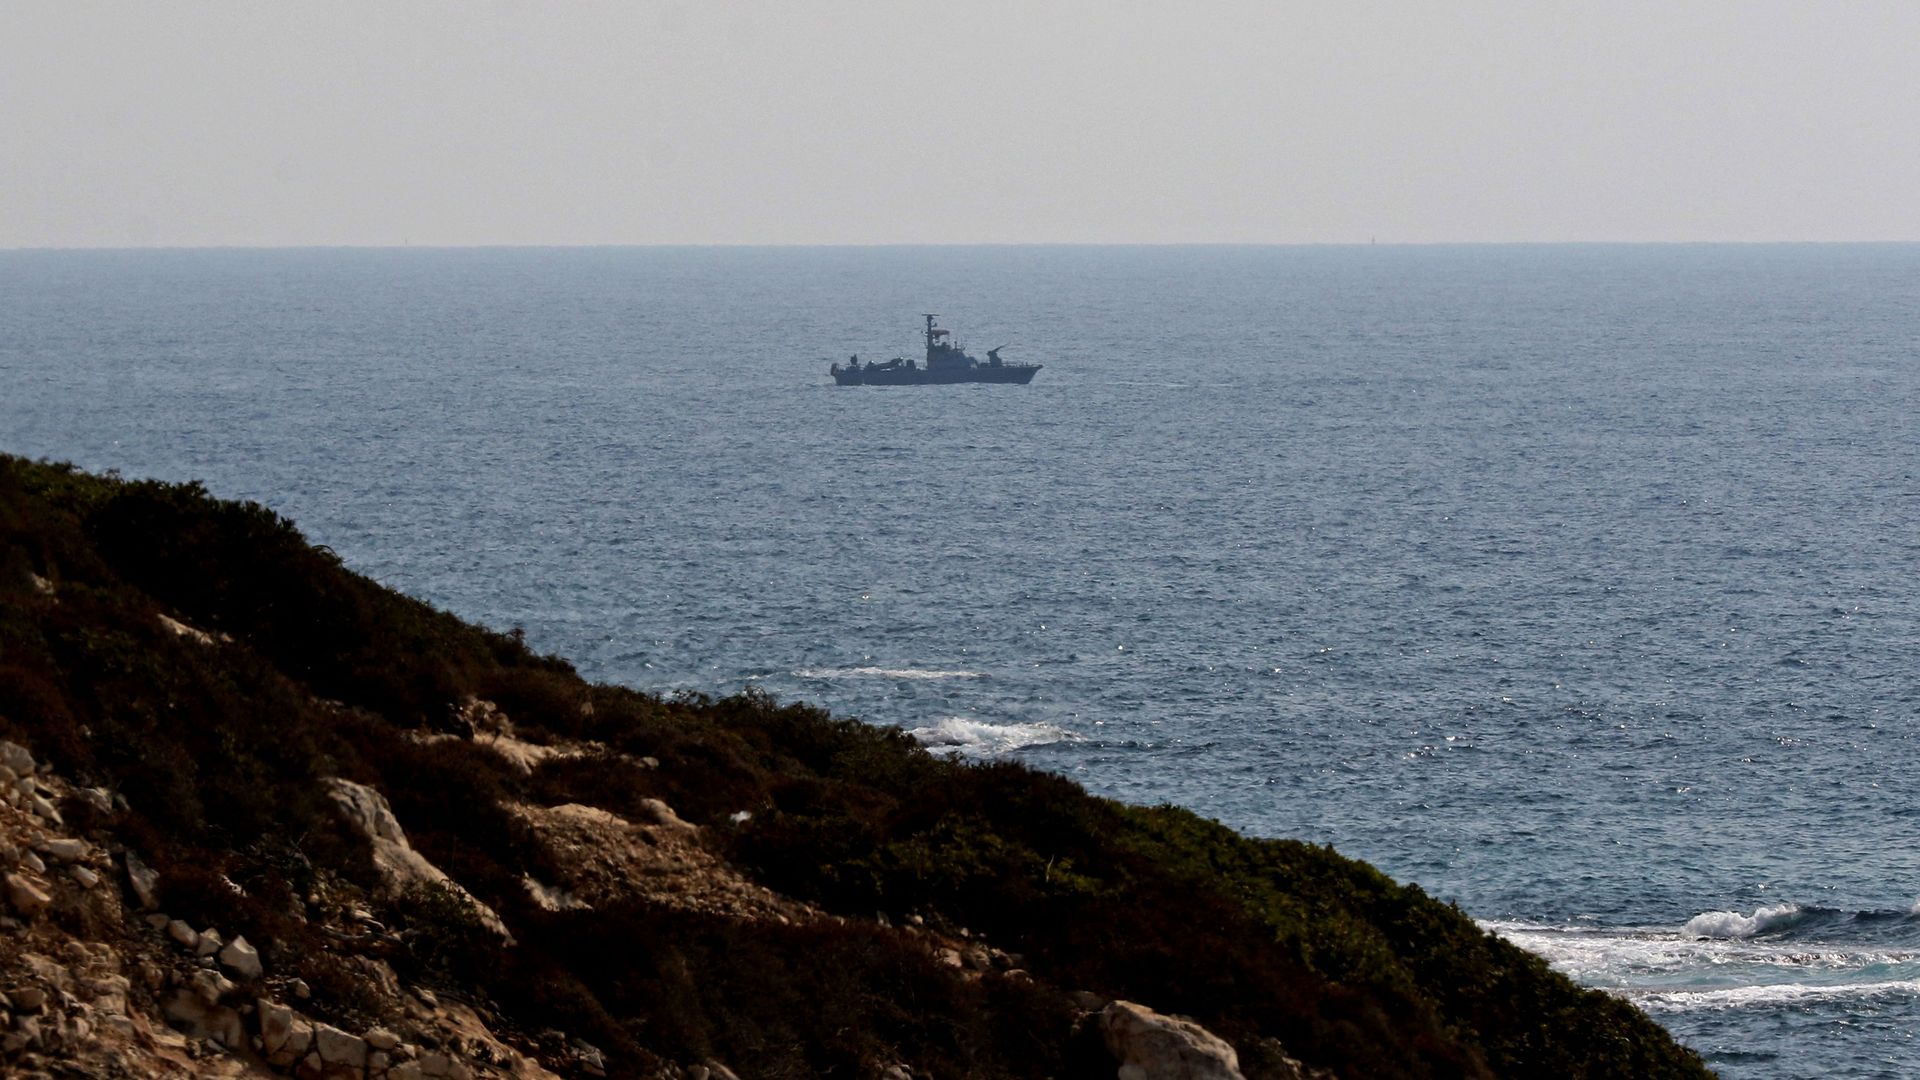 An Israeli Navy vessel patrols in the Mediterranean Sea at the maritime border between Israel and Lebanon on Sept. 4